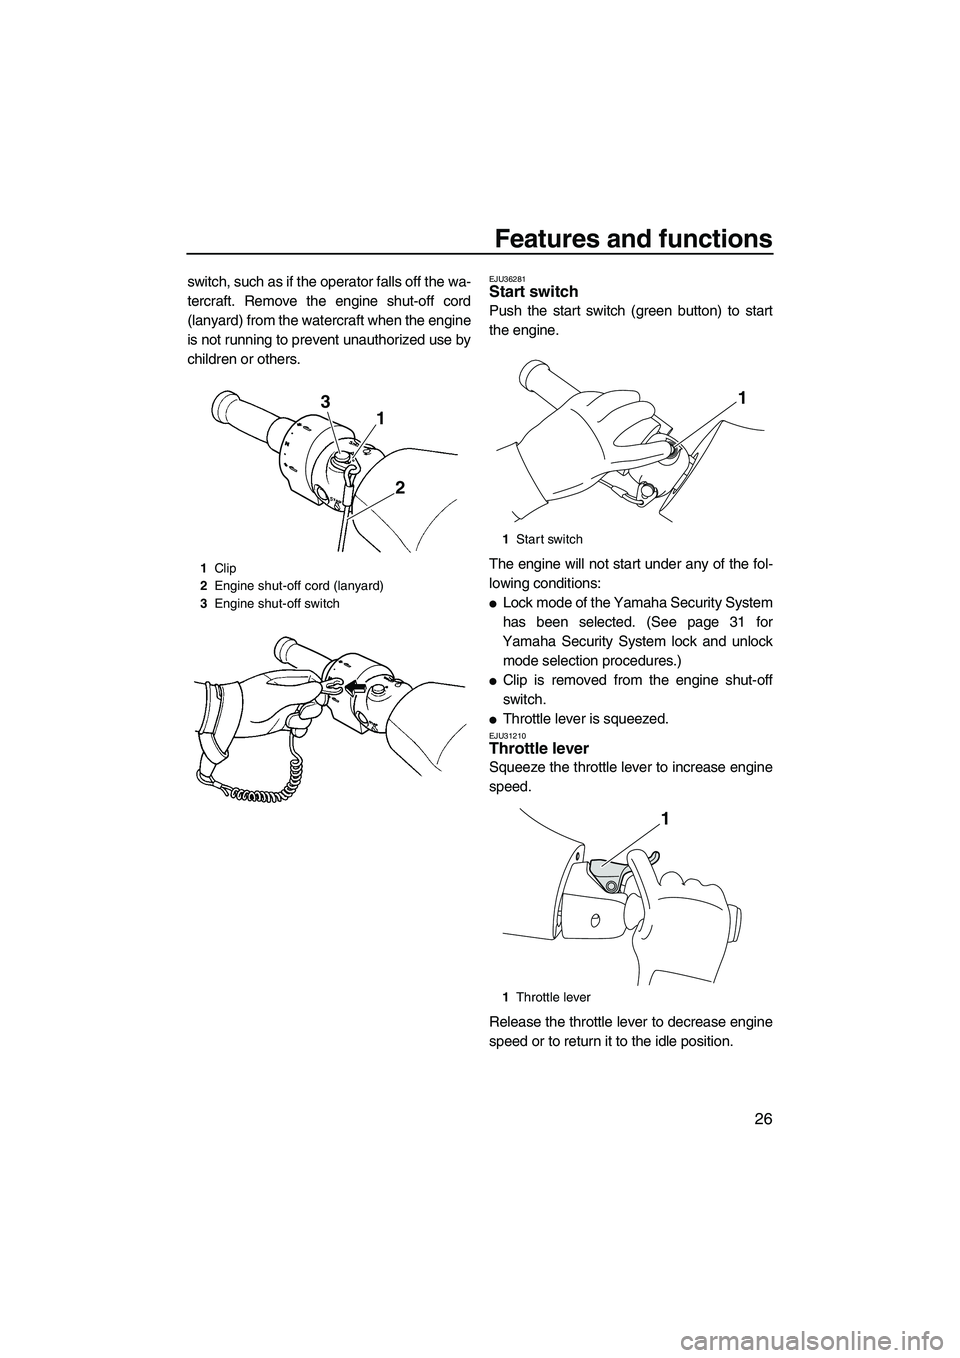 YAMAHA FZR SVHO 2009 Owners Guide Features and functions
26
switch, such as if the operator falls off the wa-
tercraft. Remove the engine shut-off cord
(lanyard) from the watercraft when the engine
is not running to prevent unauthoriz